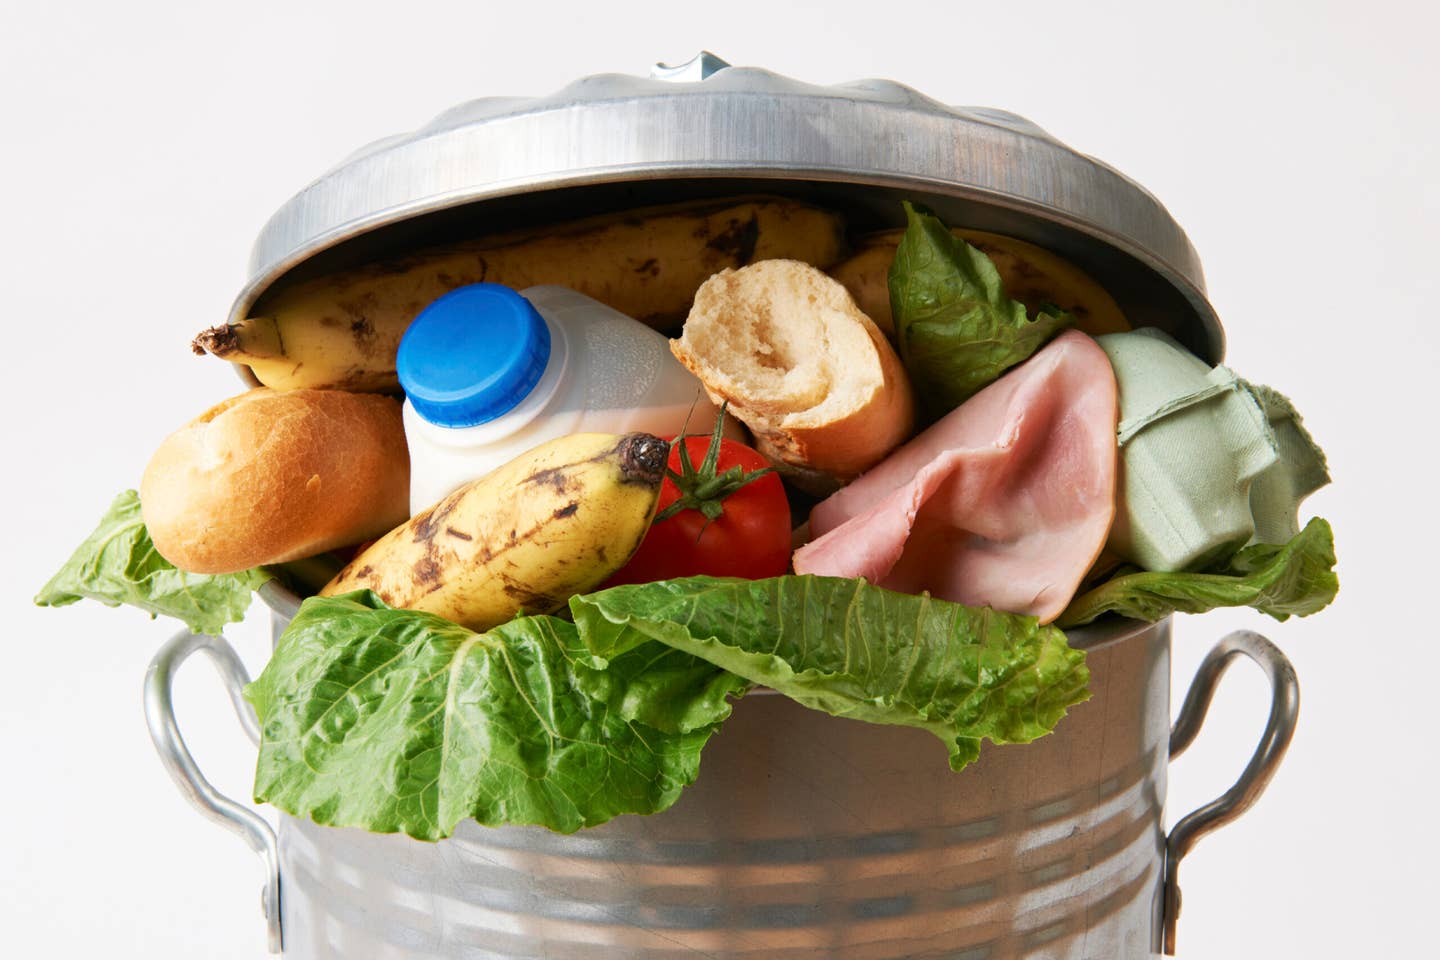 Inside New York City’s Brilliant Idea to Transform Food Waste into Clean Energy